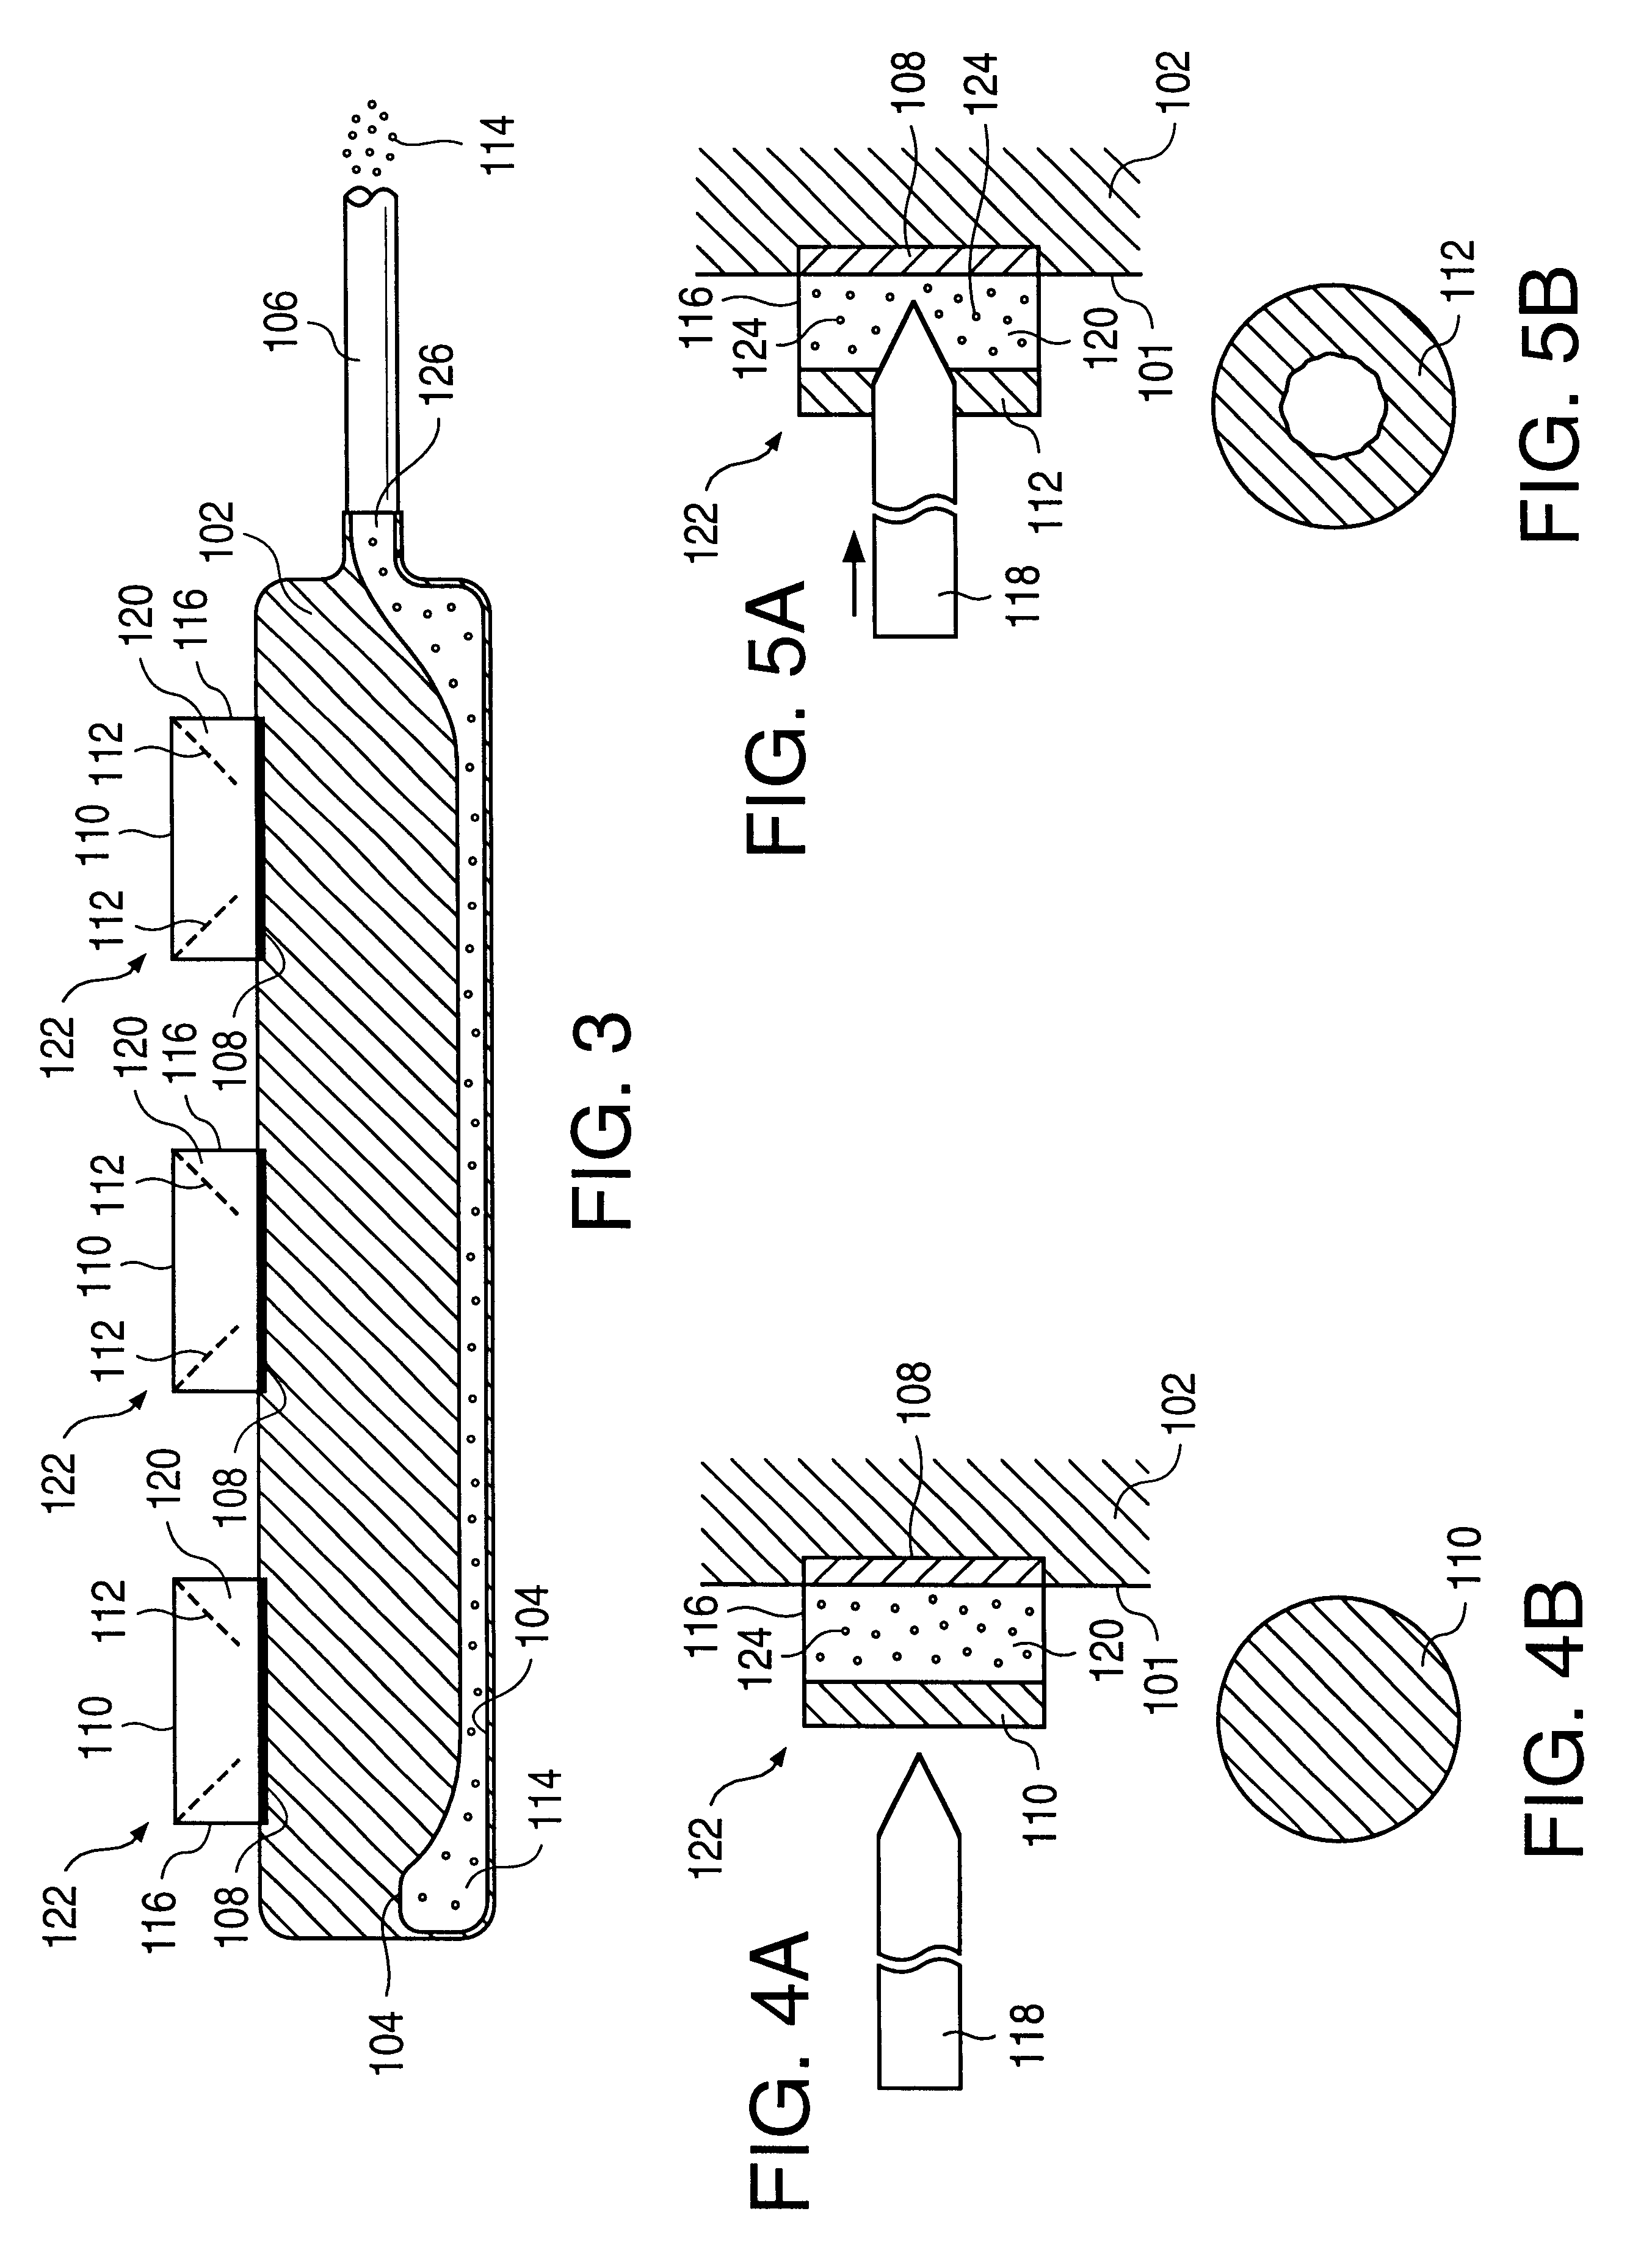 Osmotic pump delivery system with flexible drug compartment